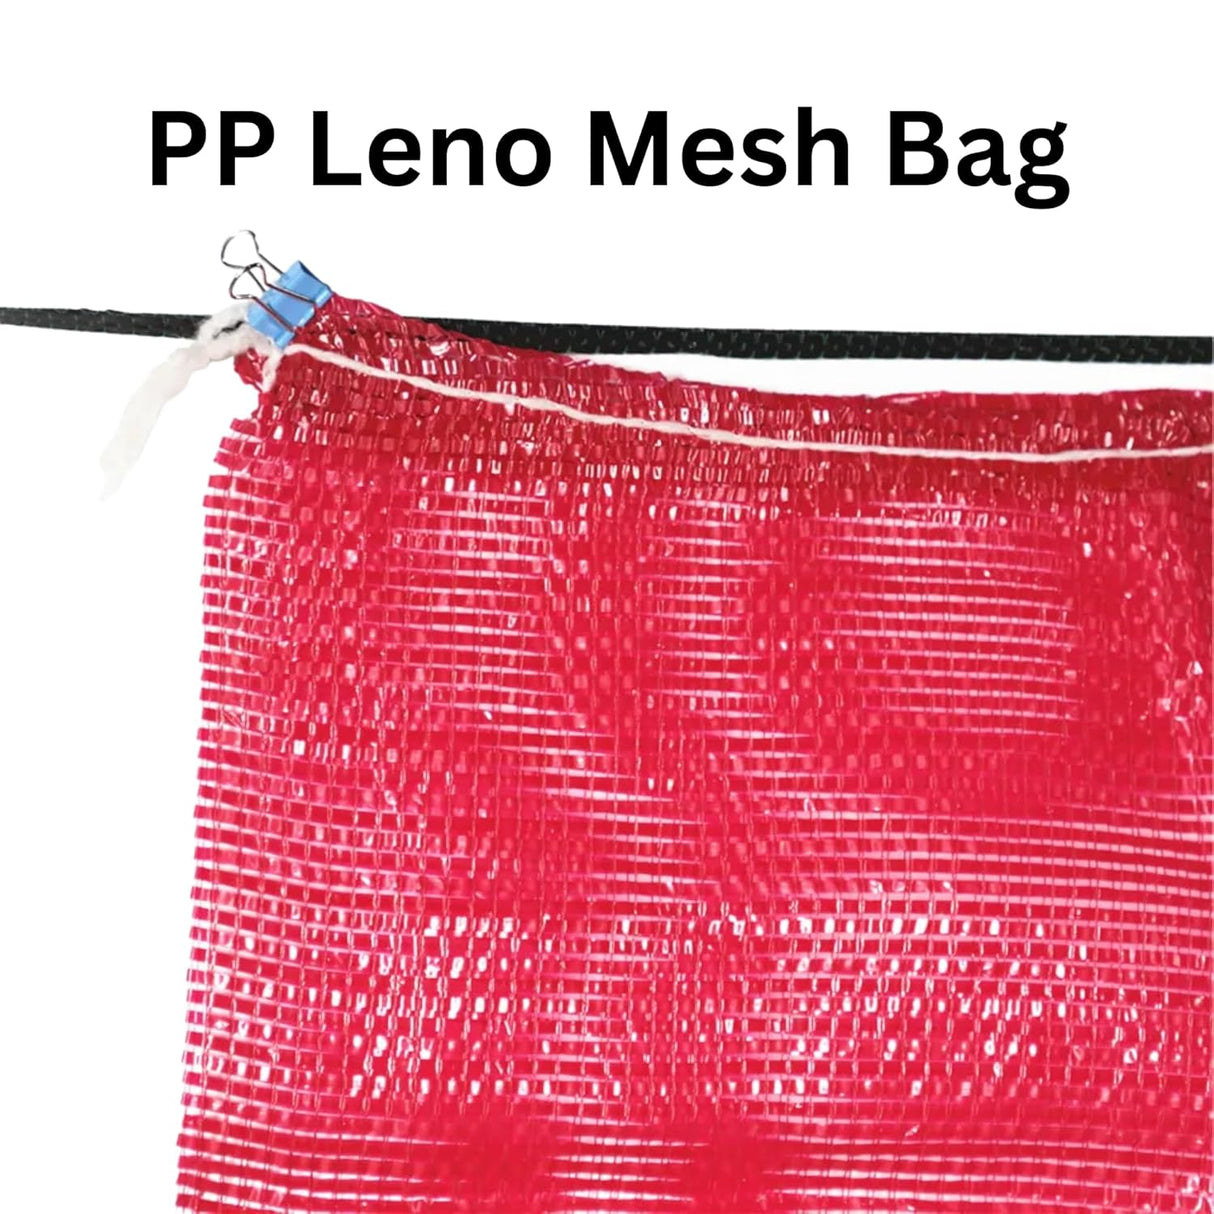 SINGHAL Leno Mesh Storage Produce Bags Reusable for Vegetable Storage Bags Onion Storage Washable Net Bags (20x28 Inch - Peach, 25)